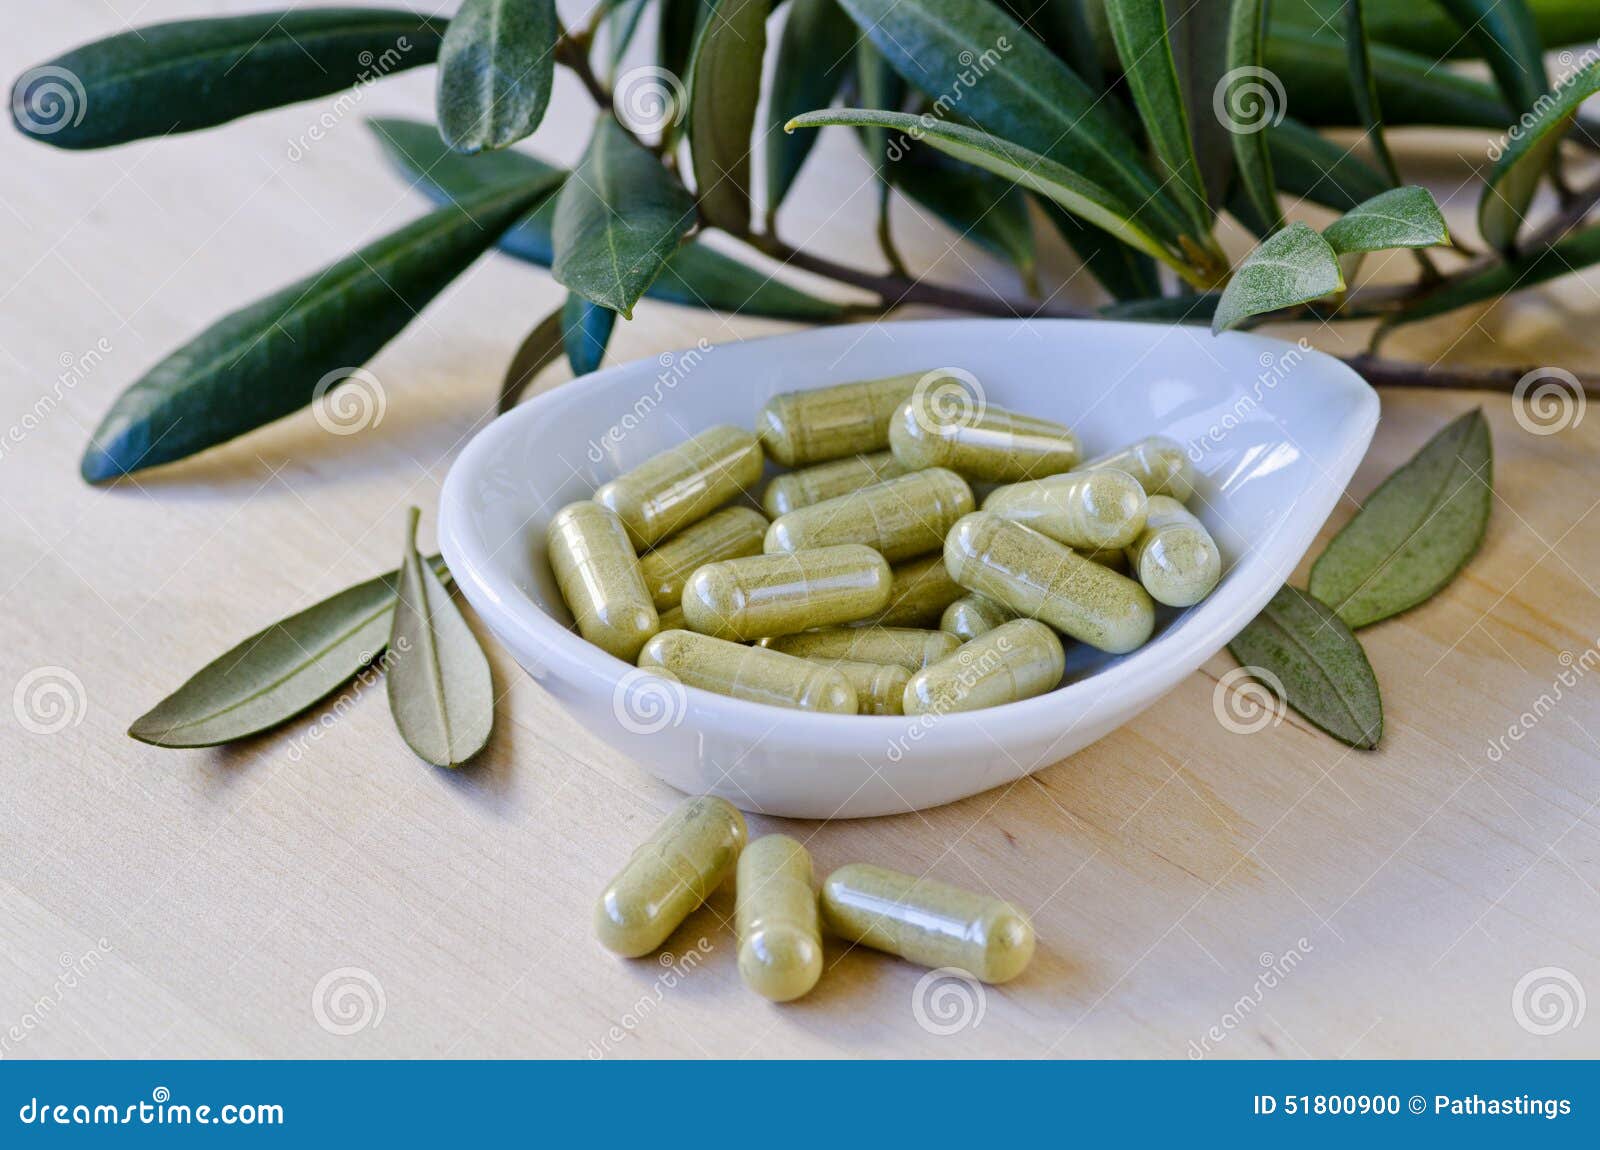 olive leaf extract in capsules. dietary supplements.